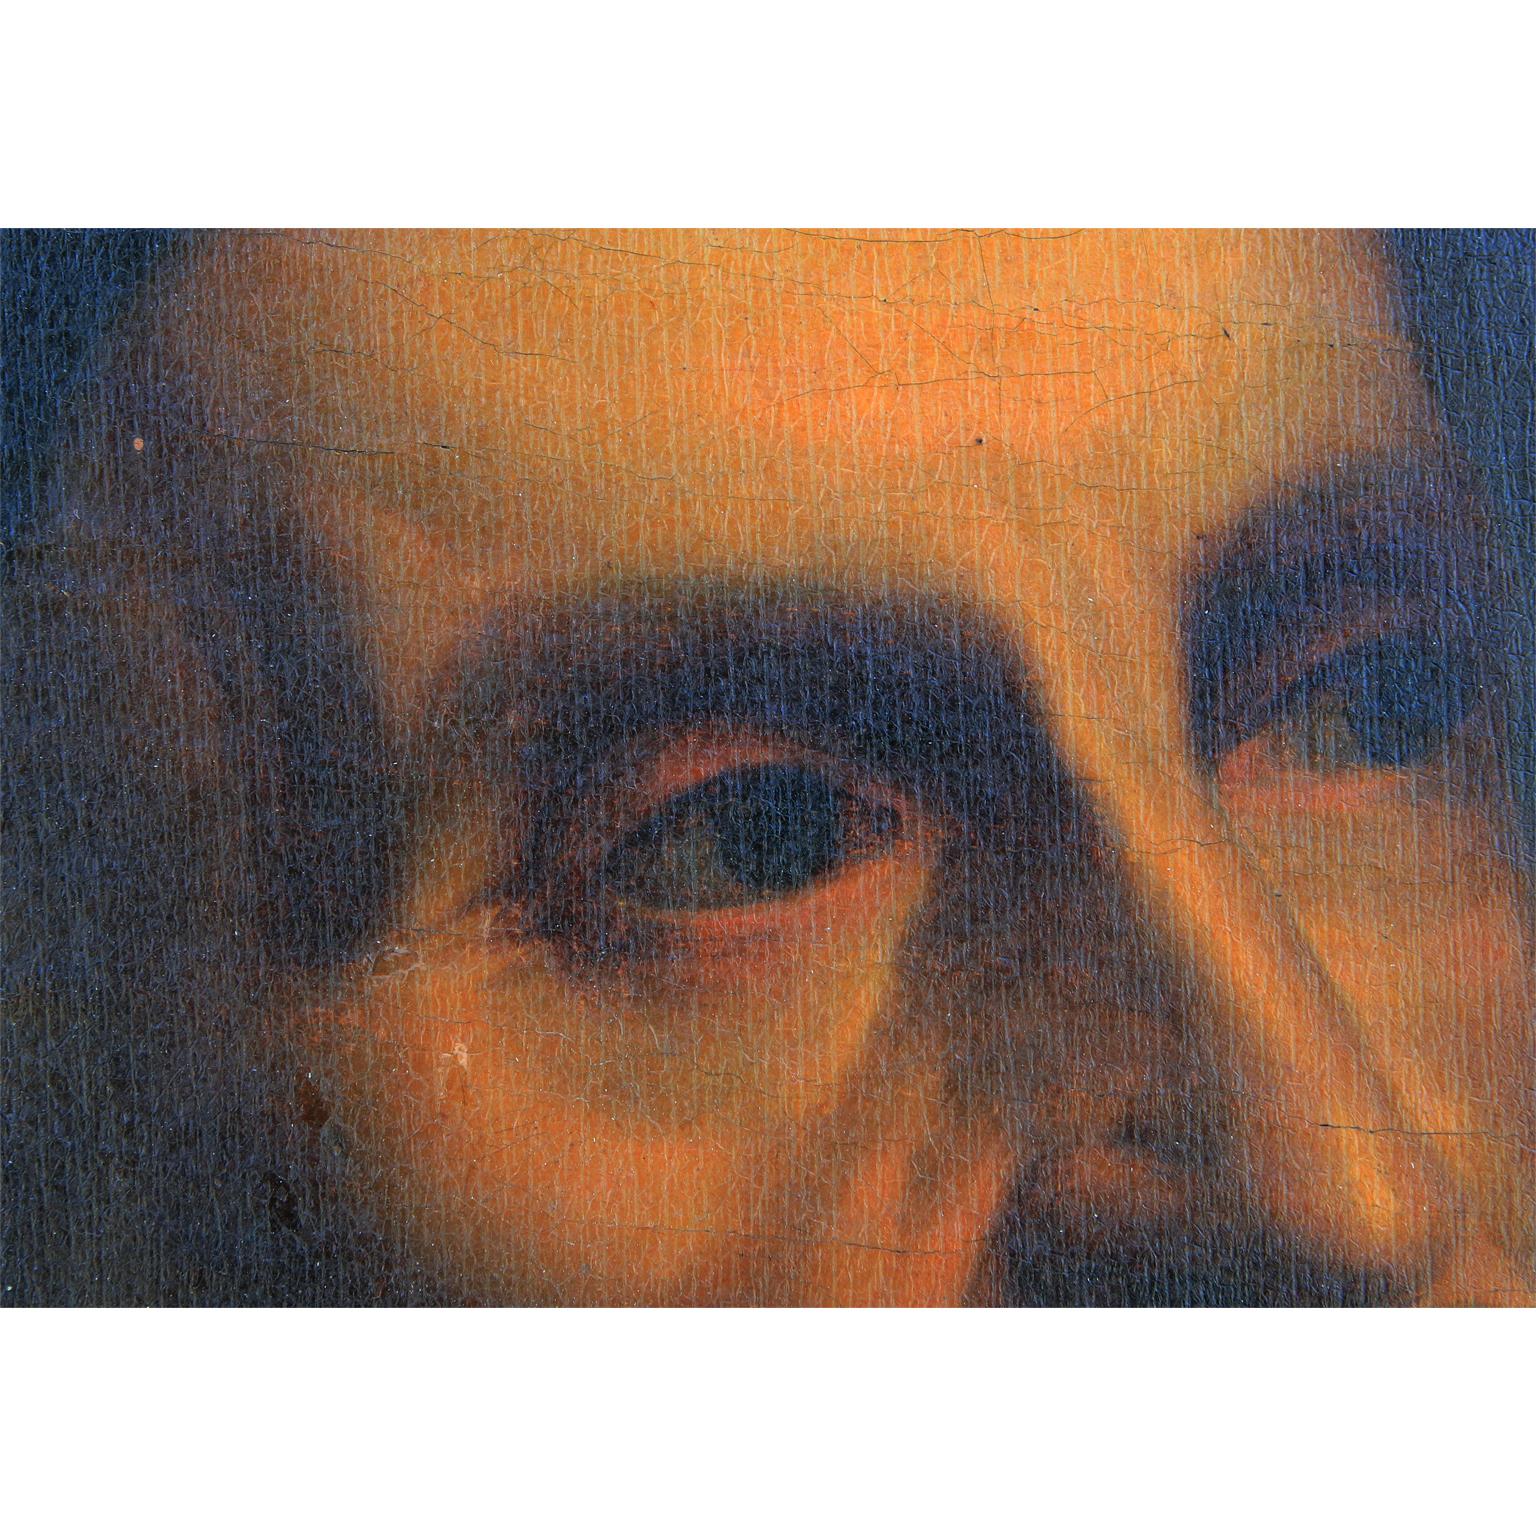 Intricately rendered painting after the Renaissance period self portrait of the artist Tiziano Vercellio, better known in English as Titian. The work features the artist with his iconic beard, paint palette, and necklace. The original painting was